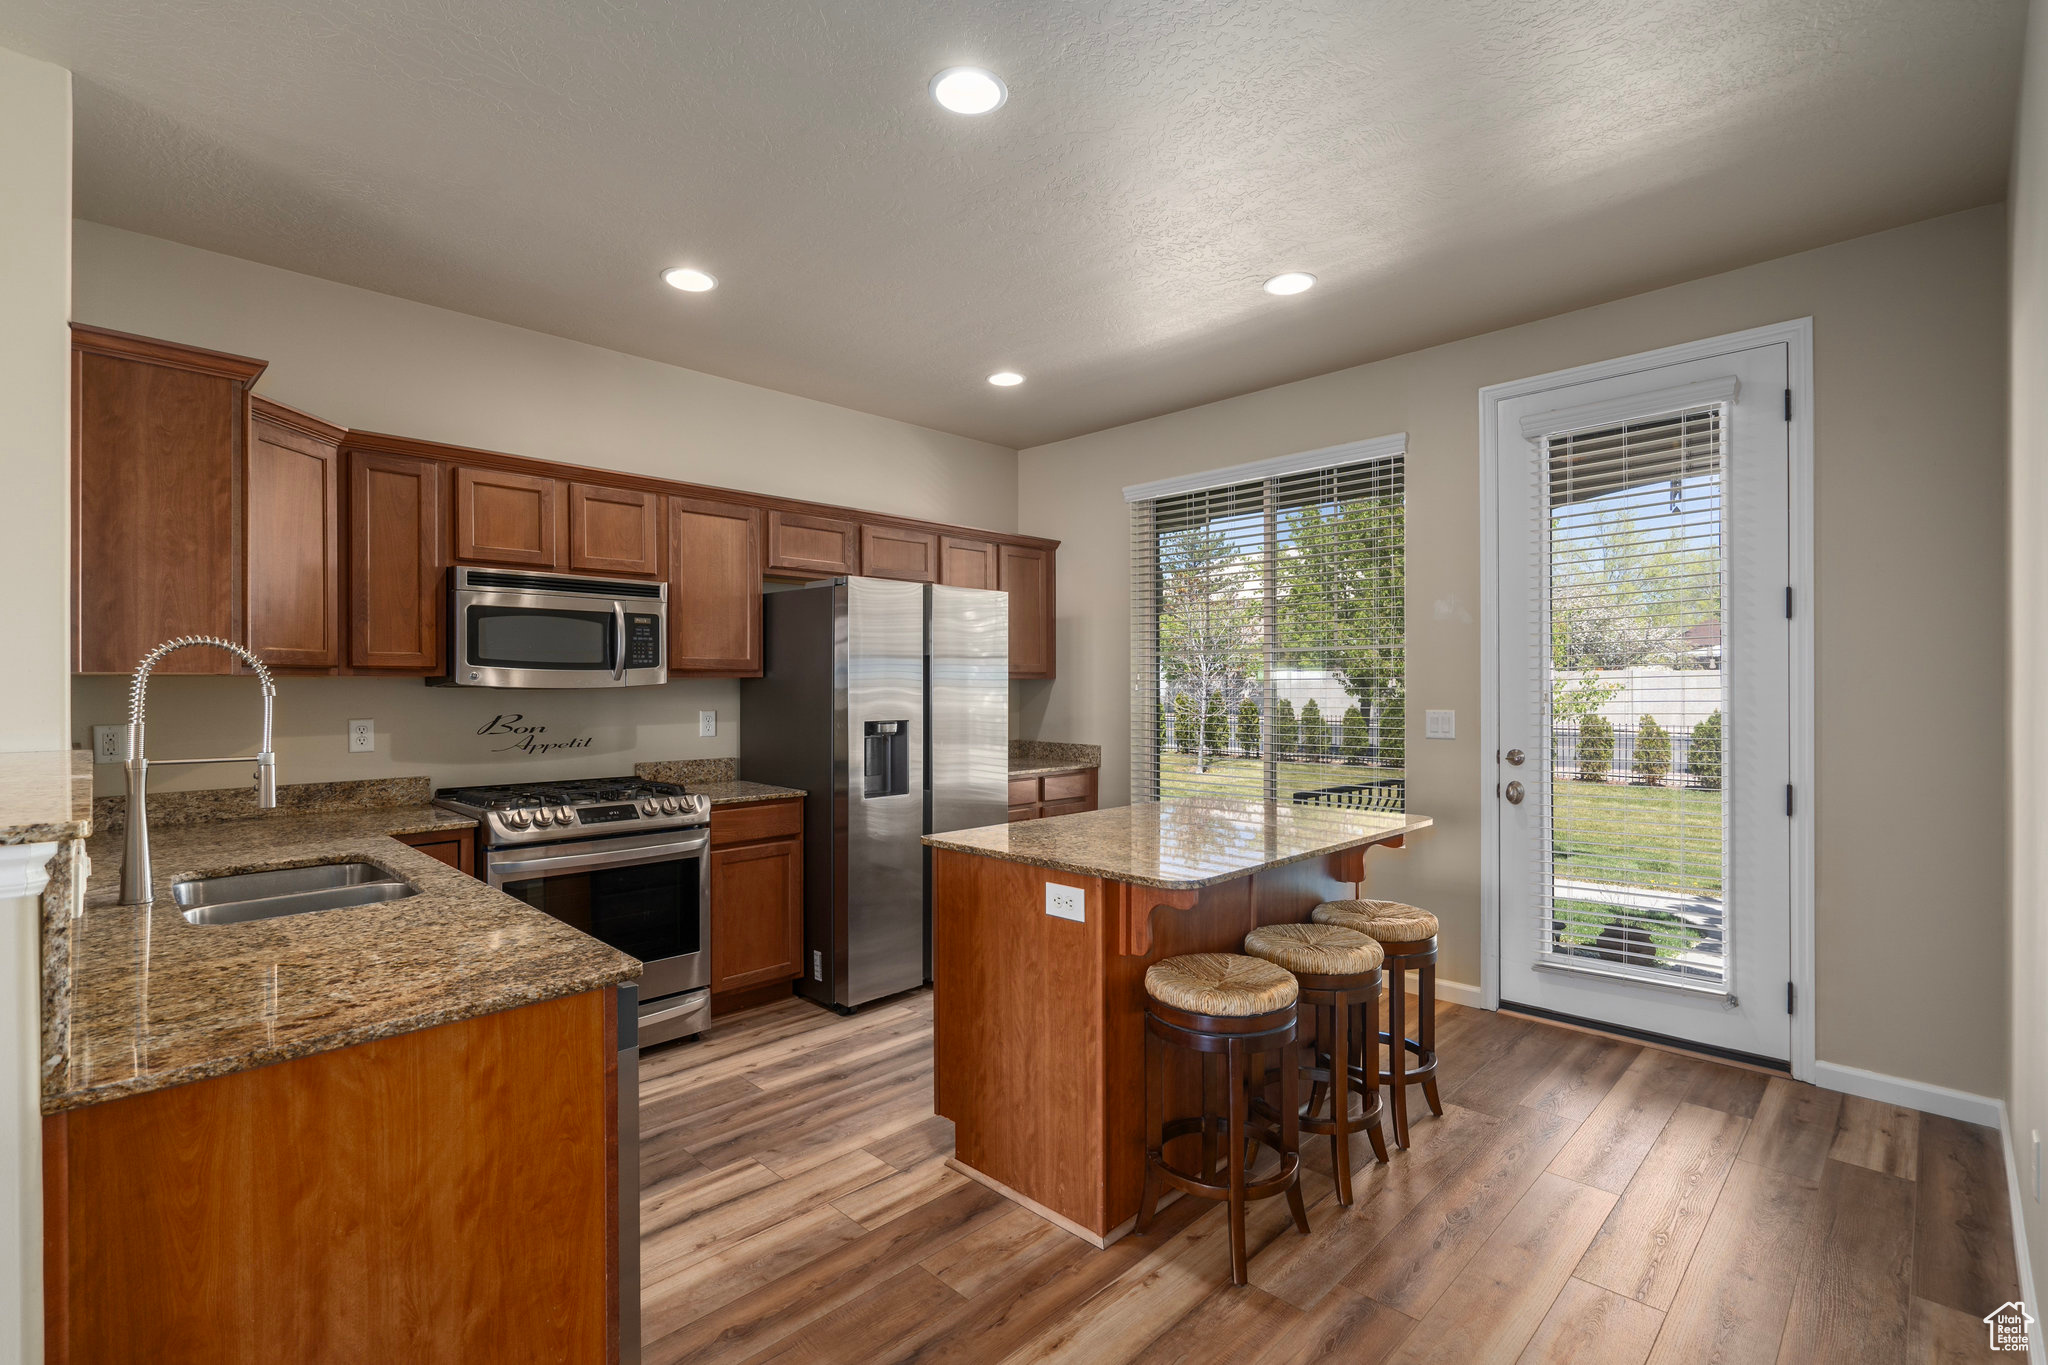 Kitchen with hardwood / wood-style floors, appliances with stainless steel finishes, a center island, and a kitchen breakfast bar